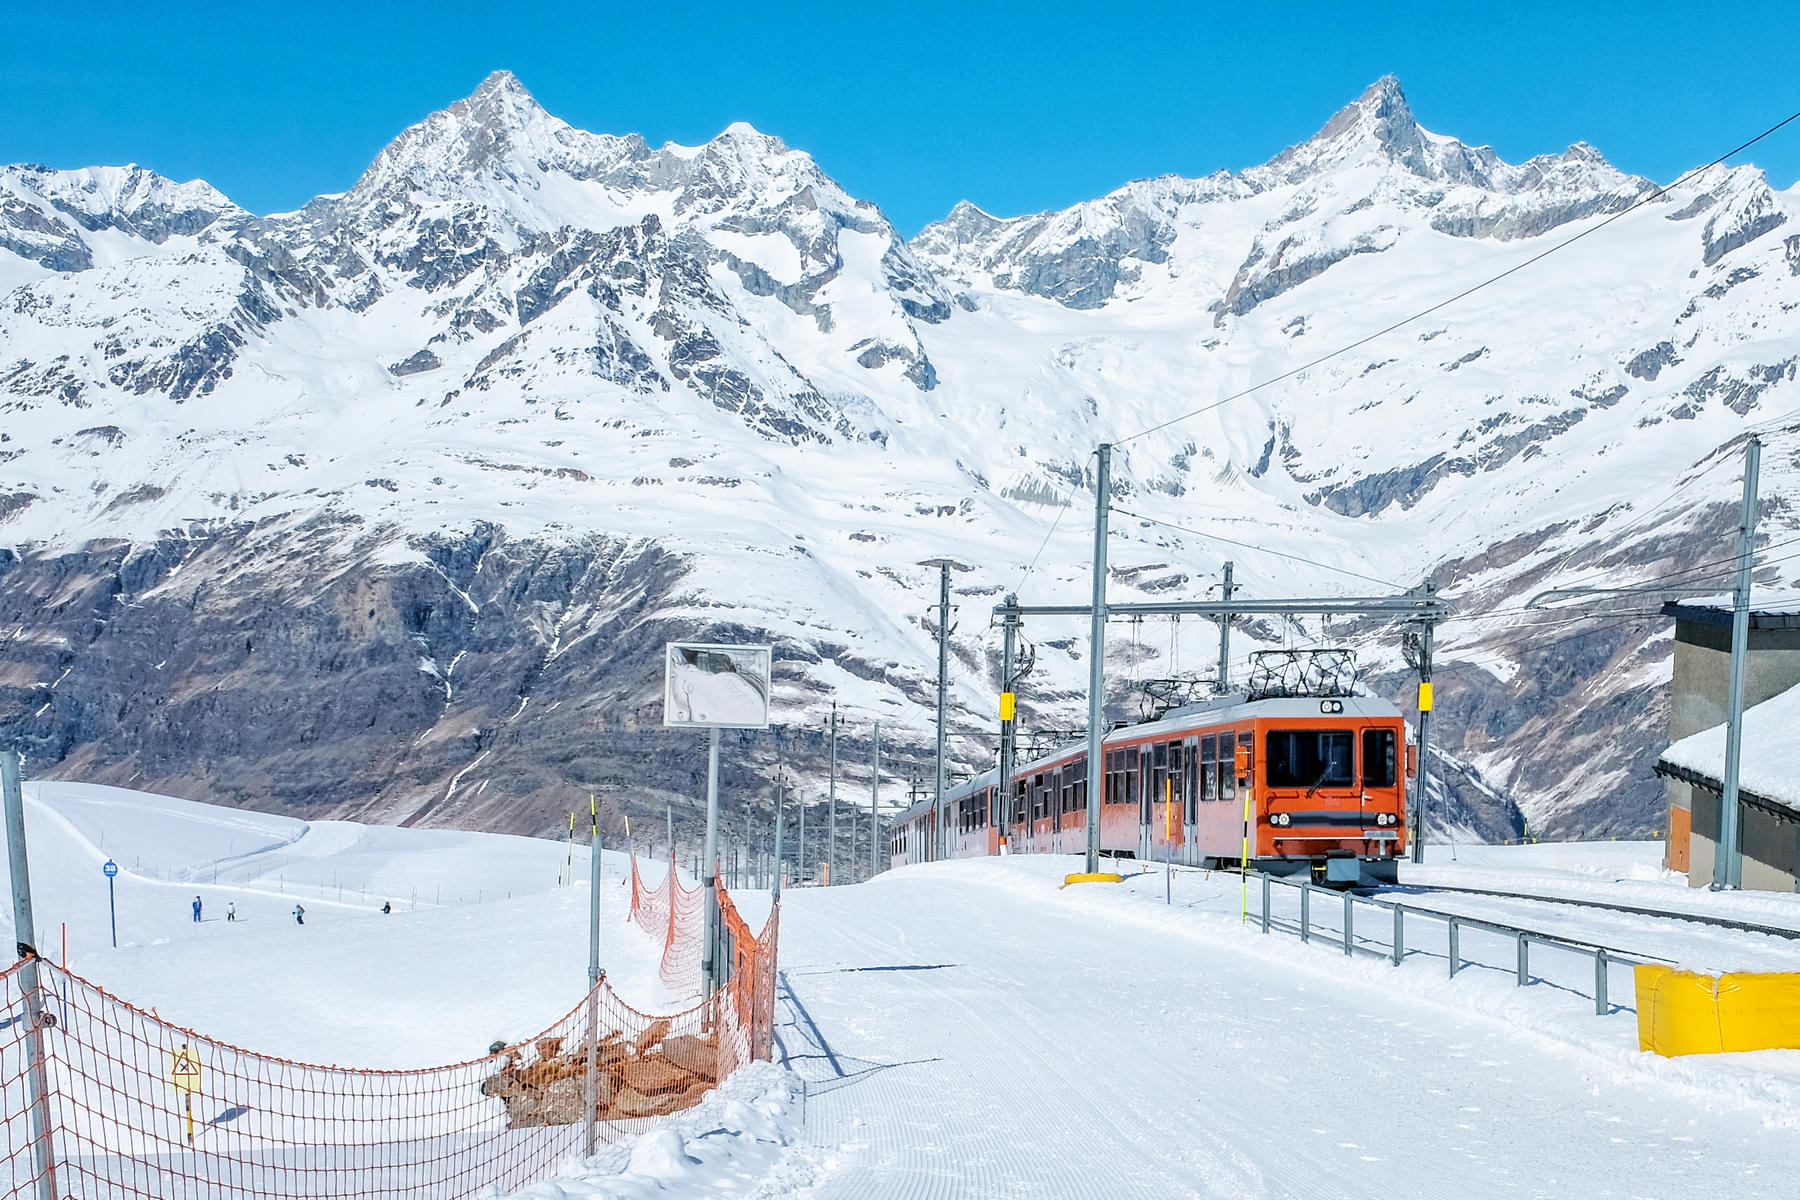 Embark upon an exciting trip to the Jungfrau summit